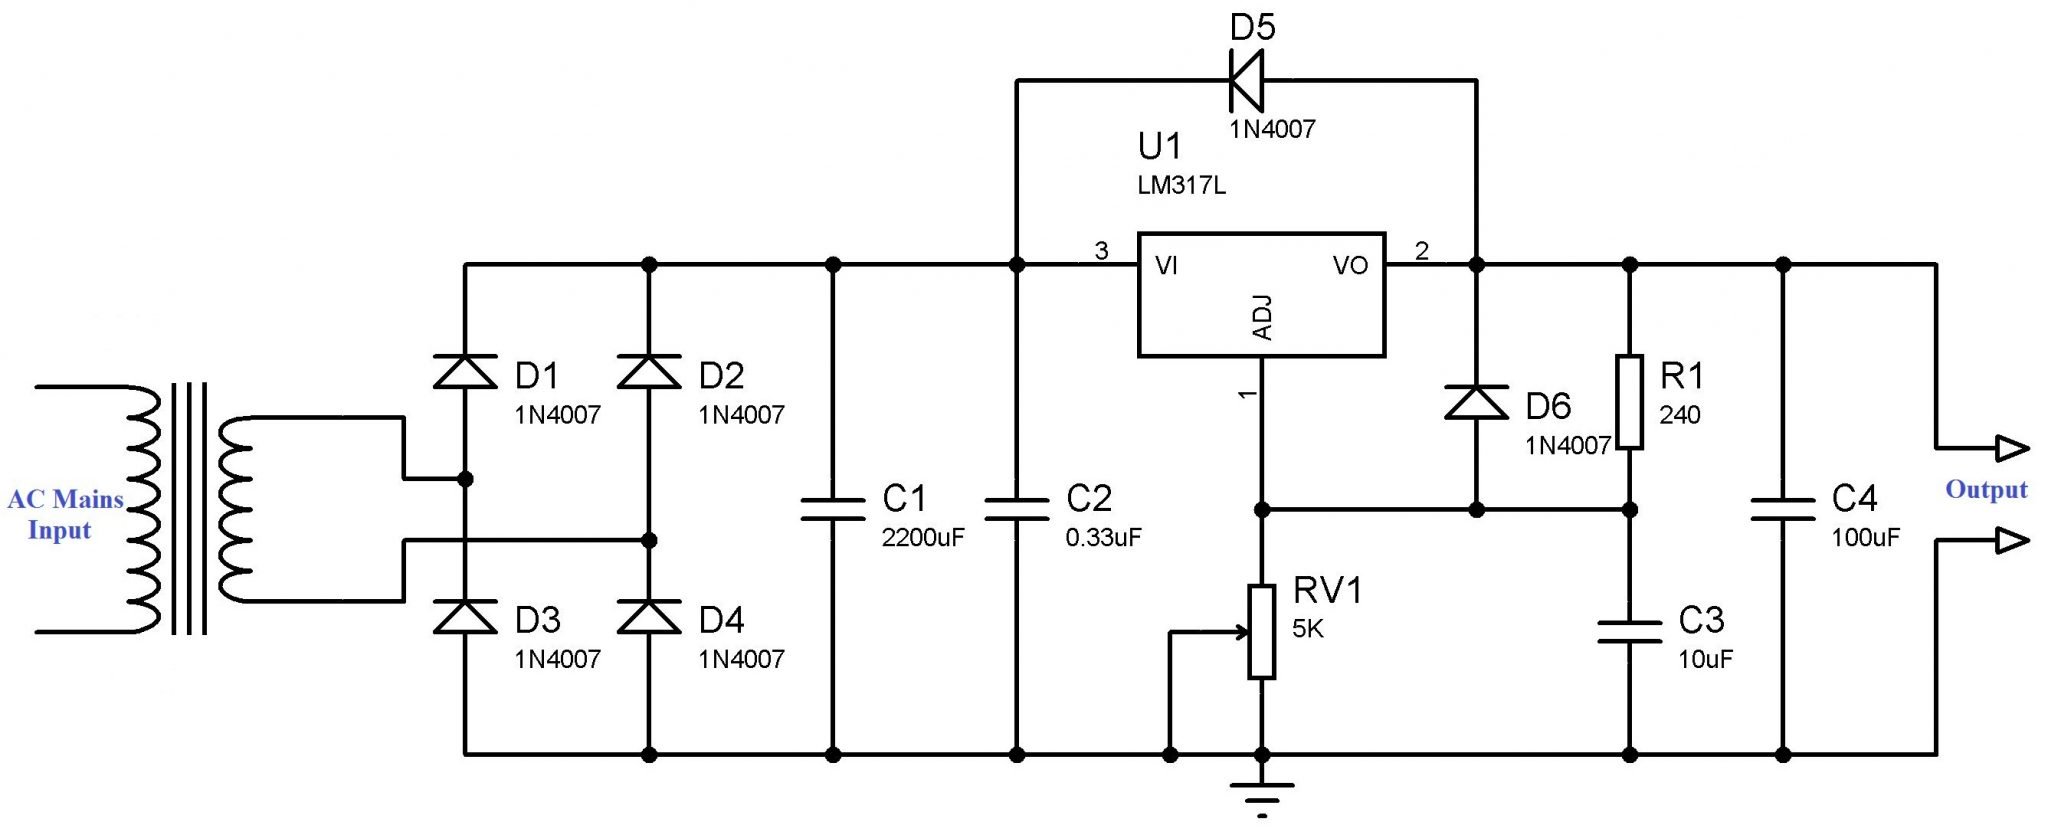 Variable-Power-Supply-using-LM317.jpg